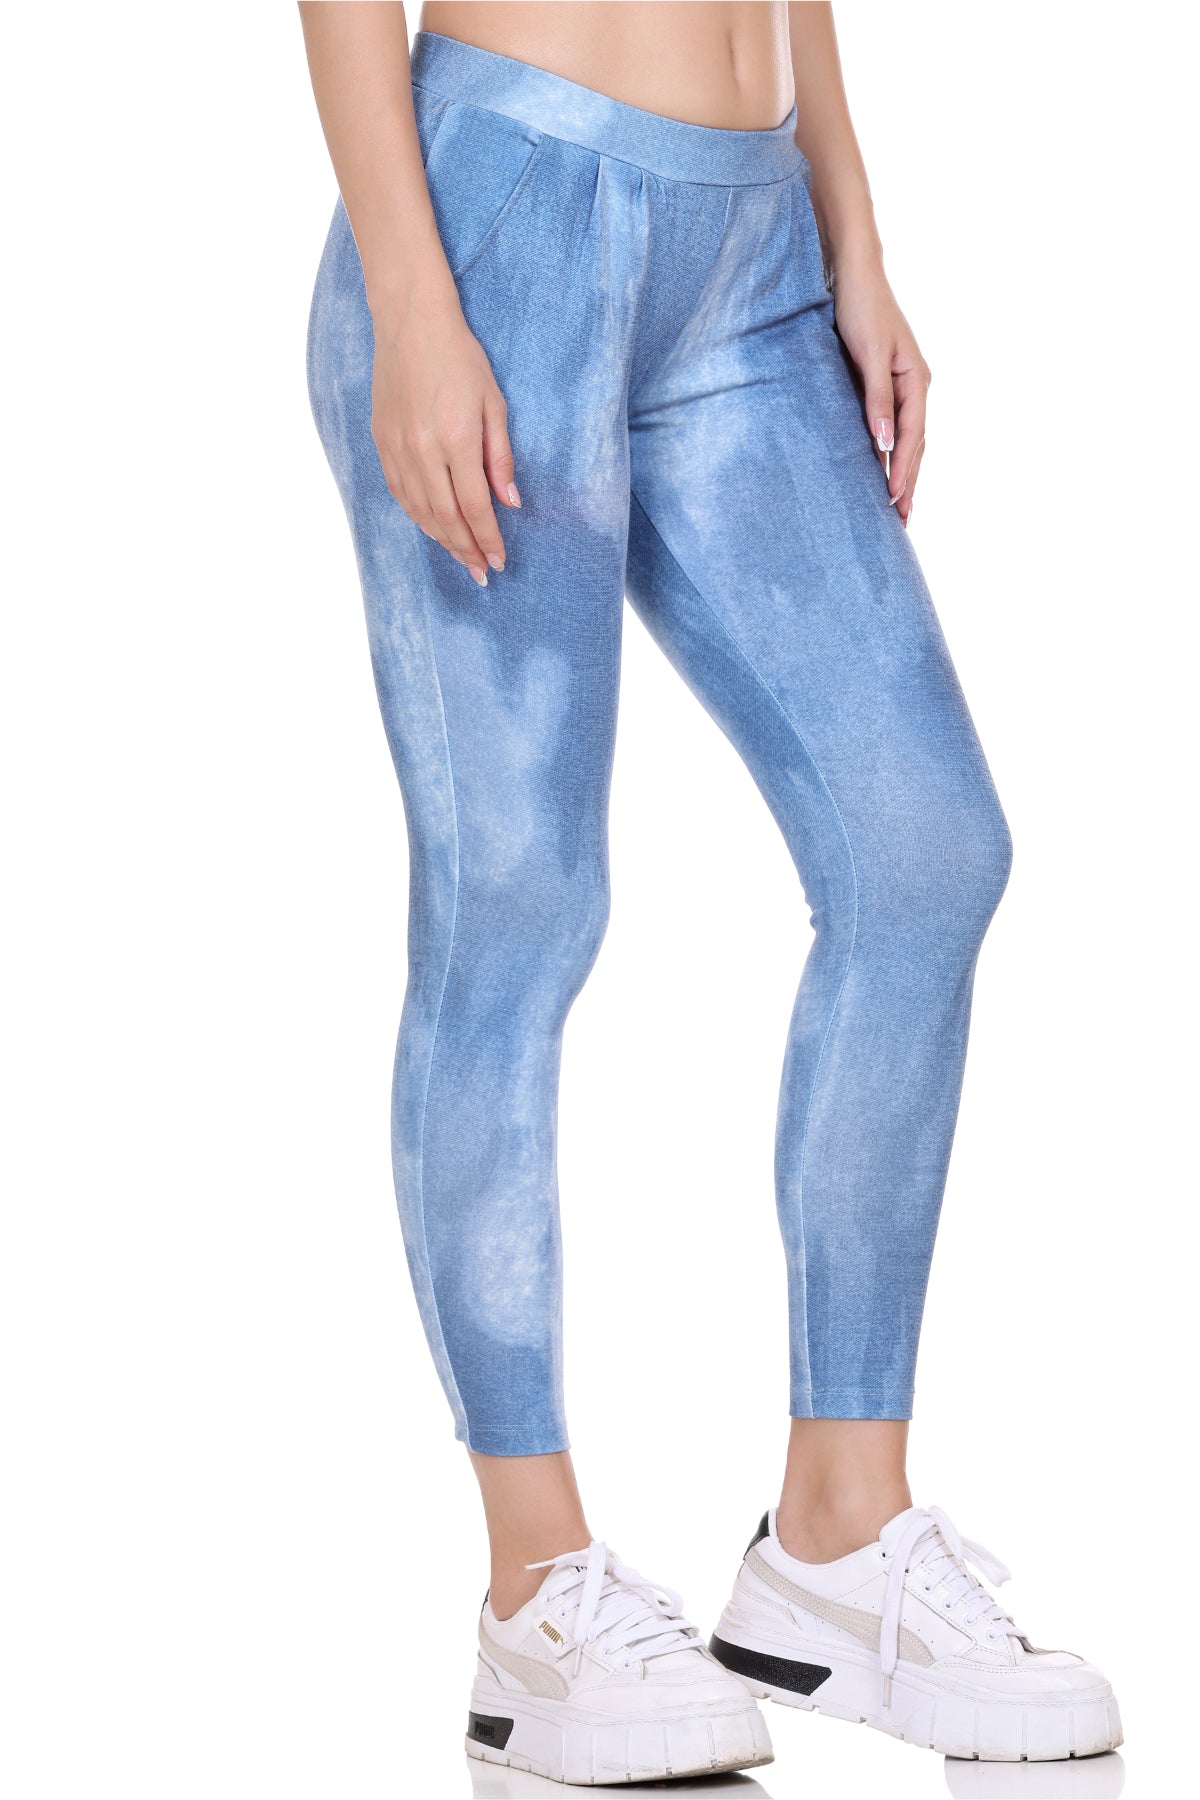 Buy Grey Jeans & Jeggings for Women by Marks & Spencer Online | Ajio.com